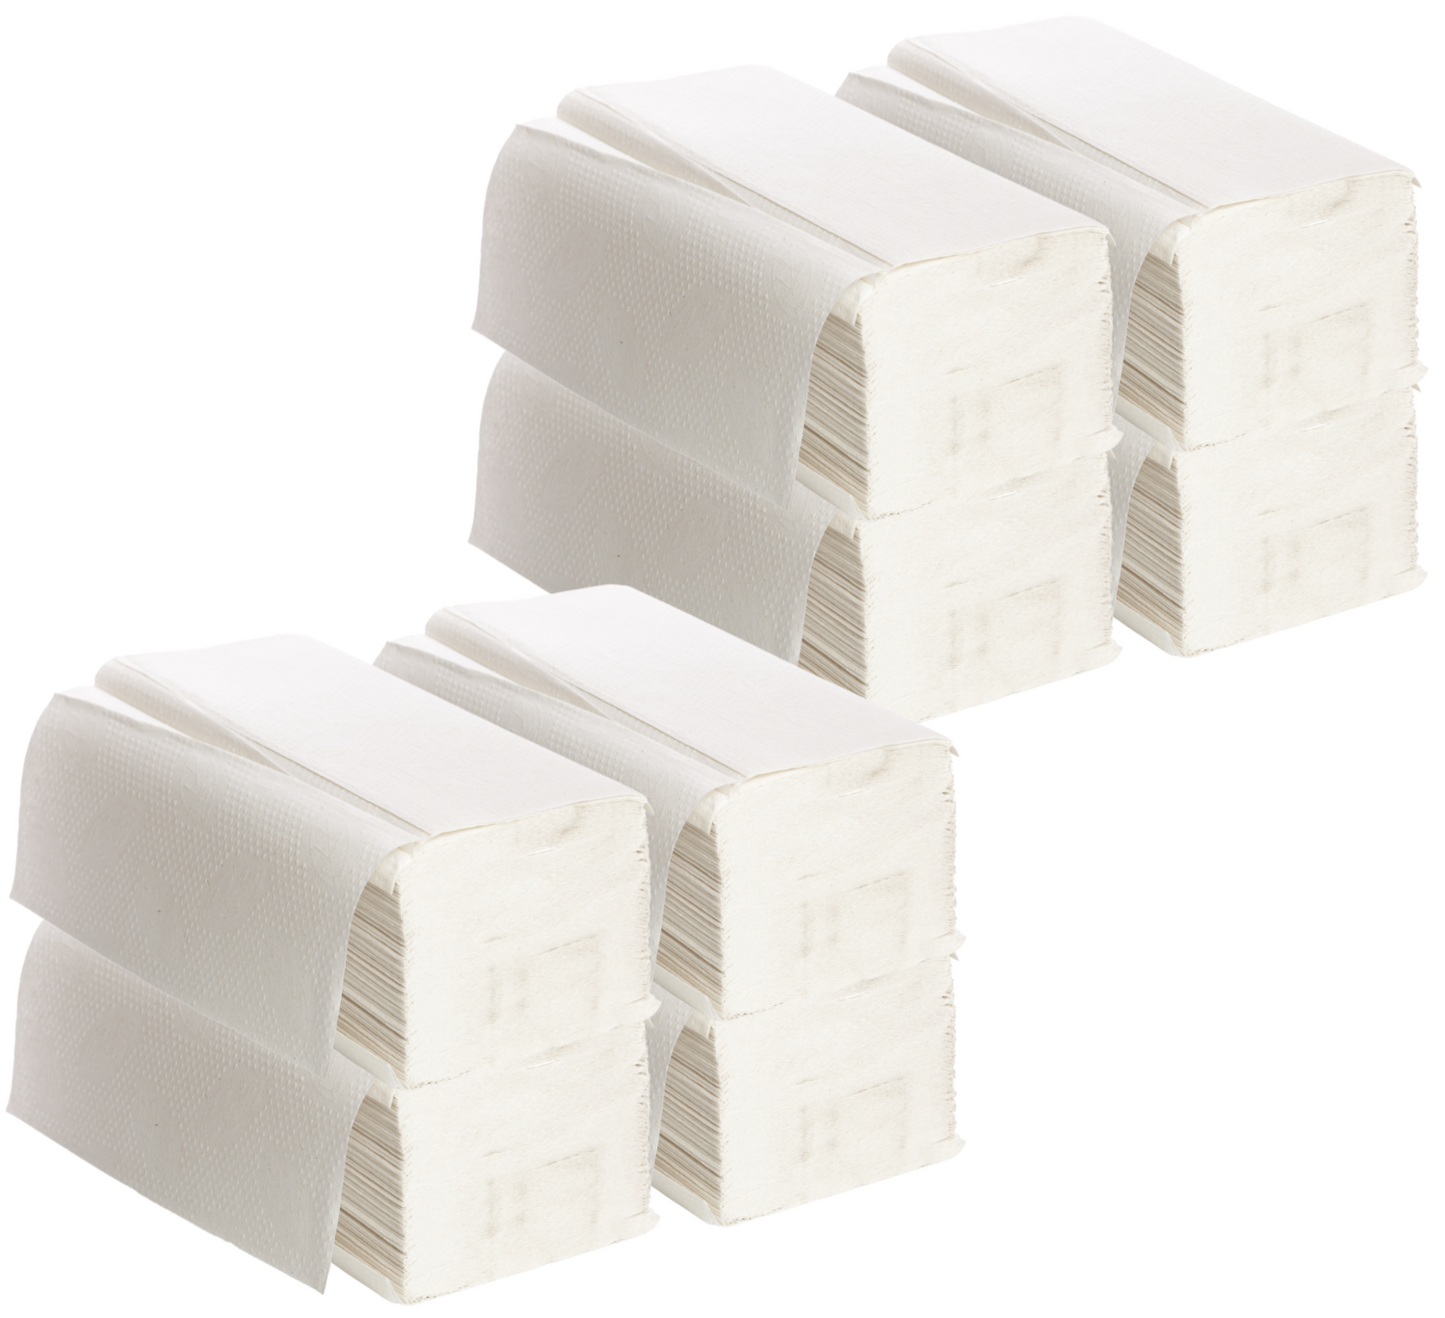 EJY IMPORT Multifold Paper Towels